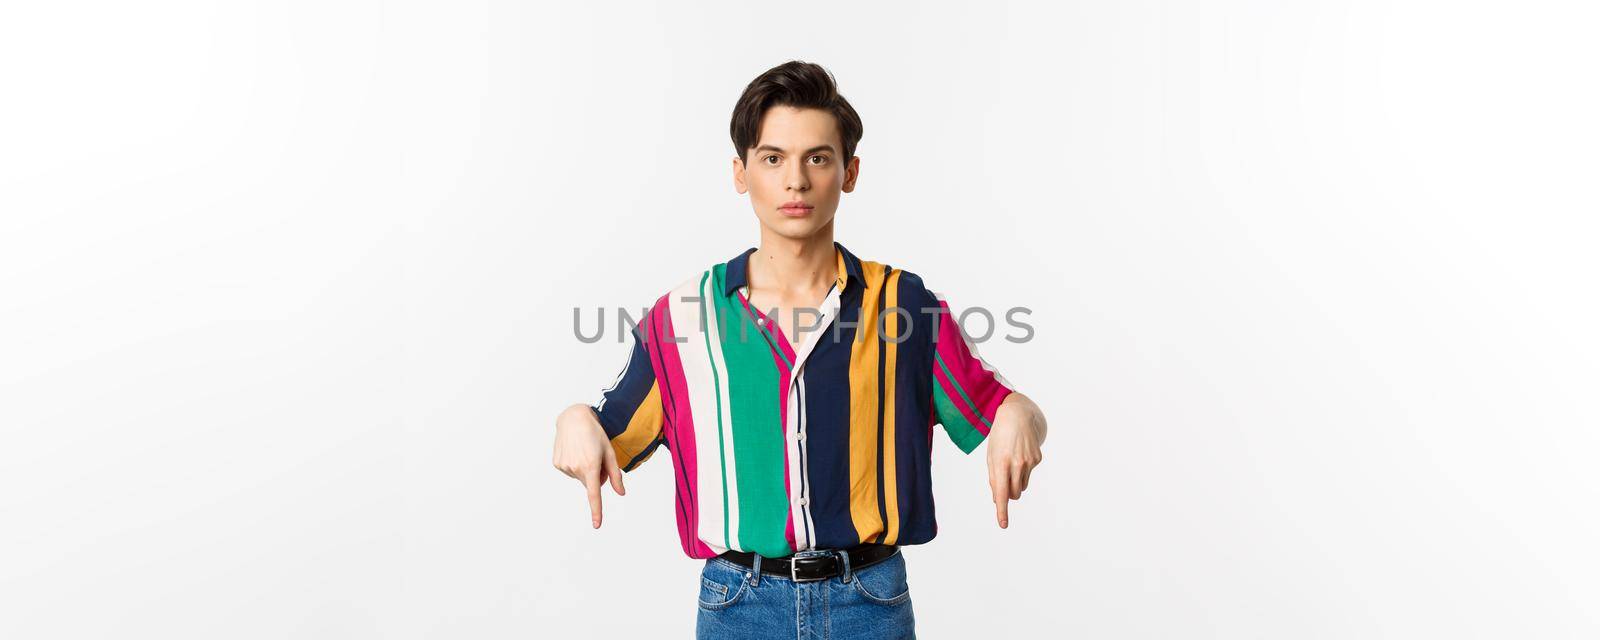 Young handsome queer guy pointing fingers down, showing advertisement and looking serious, standing over white background.